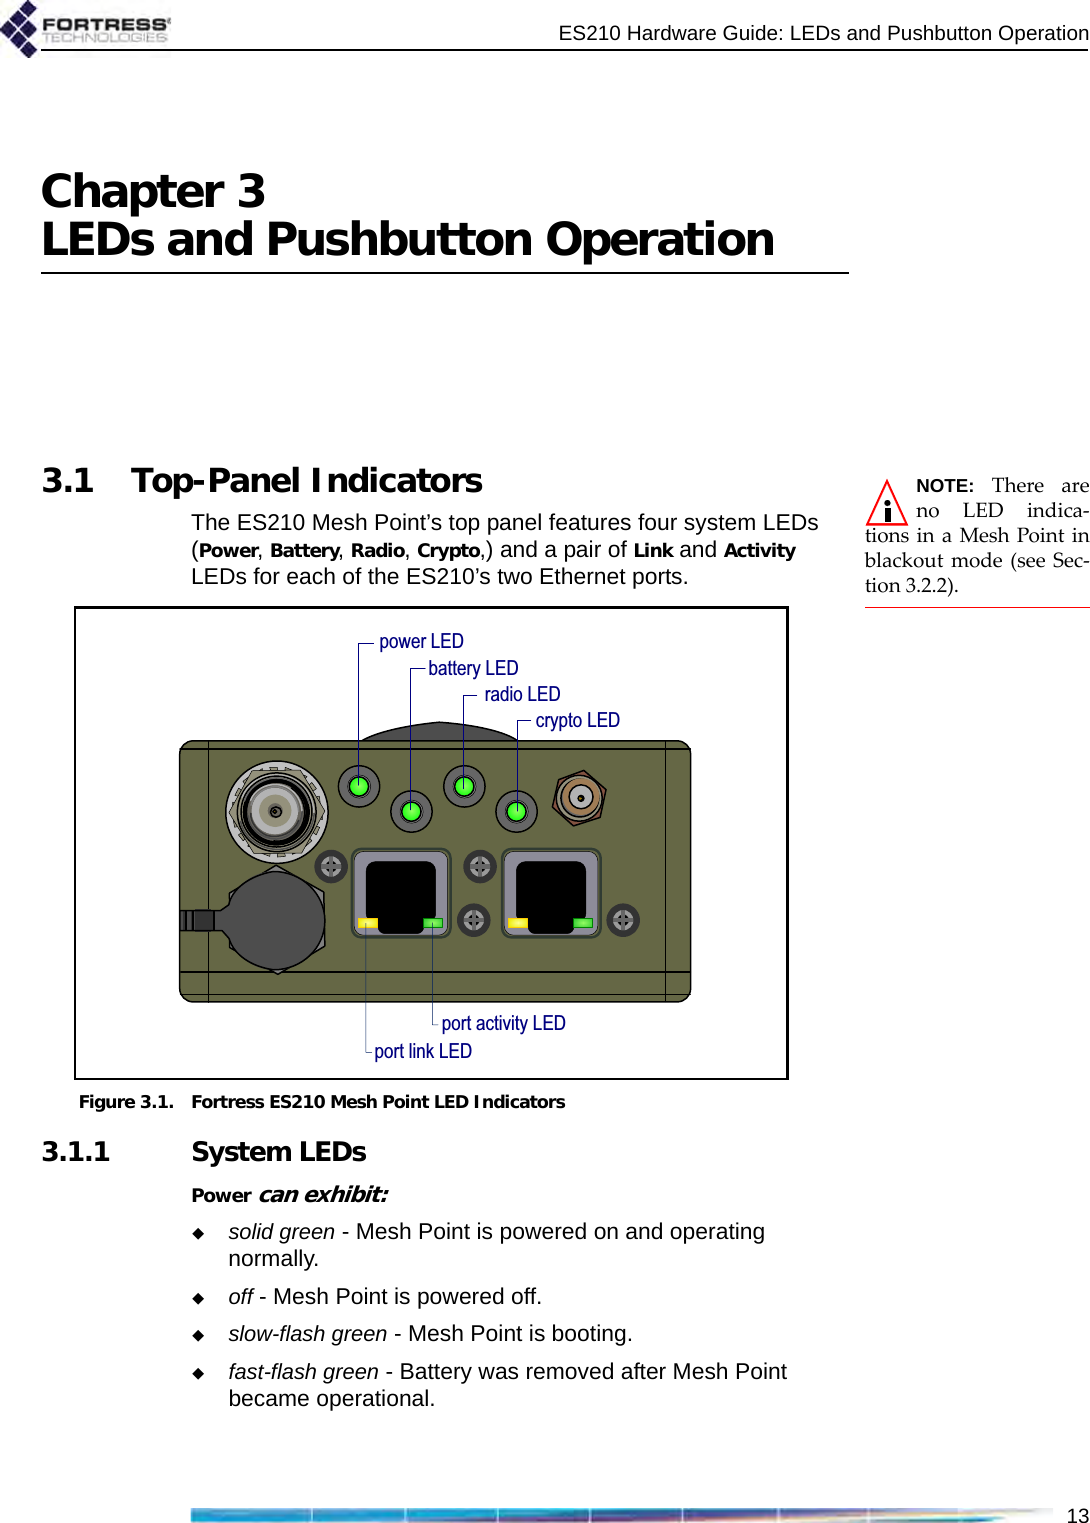 ES210 Hardware Guide: LEDs and Pushbutton Operation13Chapter 3LEDs and Pushbutton OperationNOTE: There areno LED indica-tions in a Mesh Point inblackout mode (see Sec-tion 3.2.2).3.1 Top-Panel IndicatorsThe ES210 Mesh Point’s top panel features four system LEDs (Power, Battery, Radio, Crypto,) and a pair of Link and Activity LEDs for each of the ES210’s two Ethernet ports.Figure 3.1. Fortress ES210 Mesh Point LED Indicators3.1.1 System LEDsPower can exhibit:solid green - Mesh Point is powered on and operating normally.off - Mesh Point is powered off.slow-flash green - Mesh Point is booting.fast-flash green - Battery was removed after Mesh Point became operational.power LEDcrypto LEDbattery LEDradio LEDport activity LEDport link LED